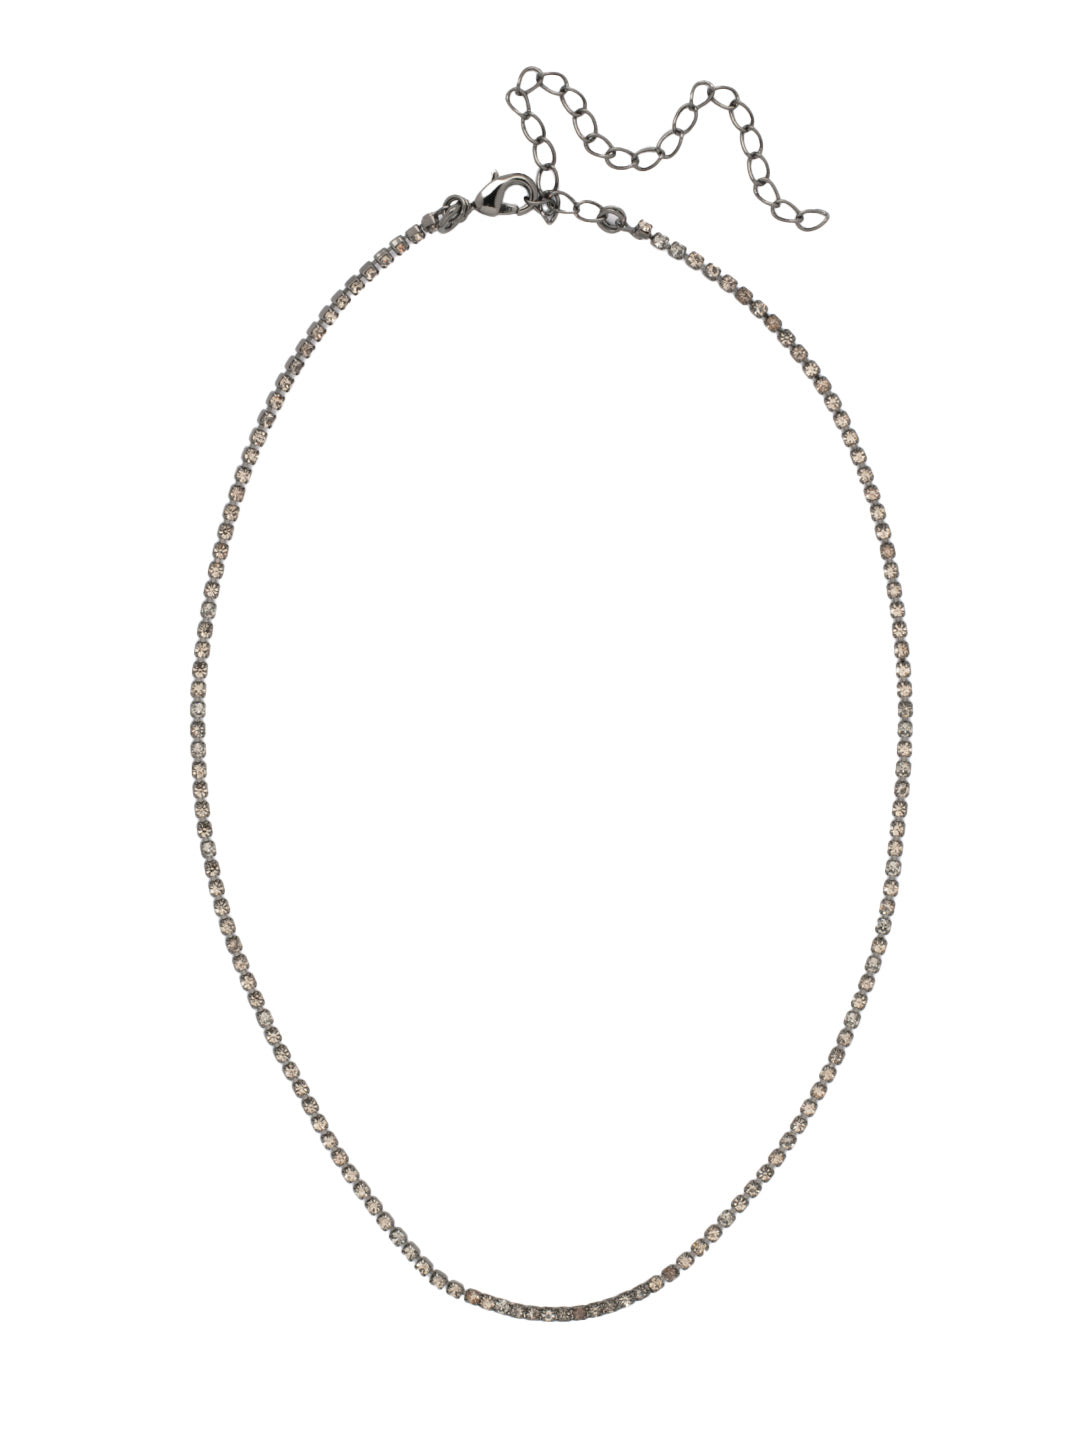 Mini Marnie Tennis Necklace - NFL2GMBD - <p>The Mini Marnie Tennie Necklace features a dainty rhinestone chain, adjustable and secured with a lobster claw clasp. From Sorrelli's Black Diamond collection in our Gun Metal finish.</p>